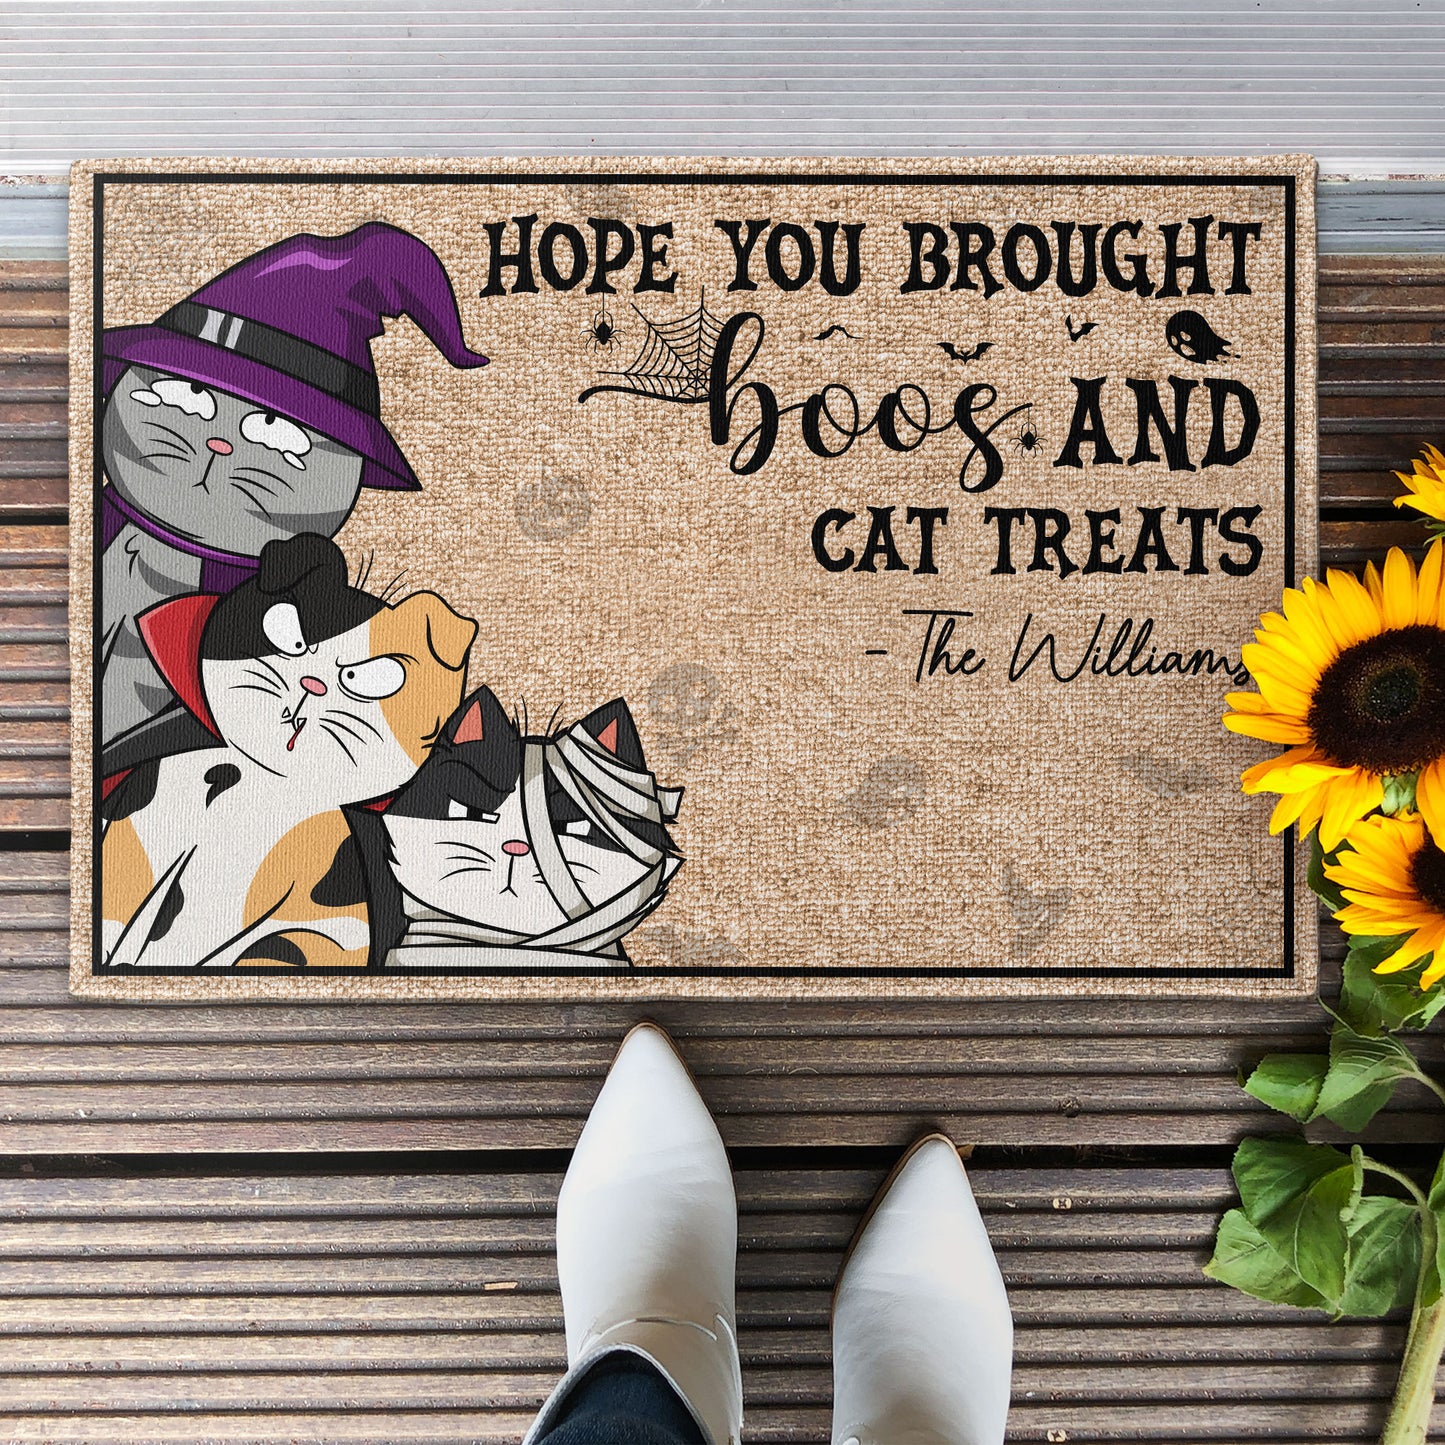 Hope You Brought Boos And Cat Treats - Personalized Doormat